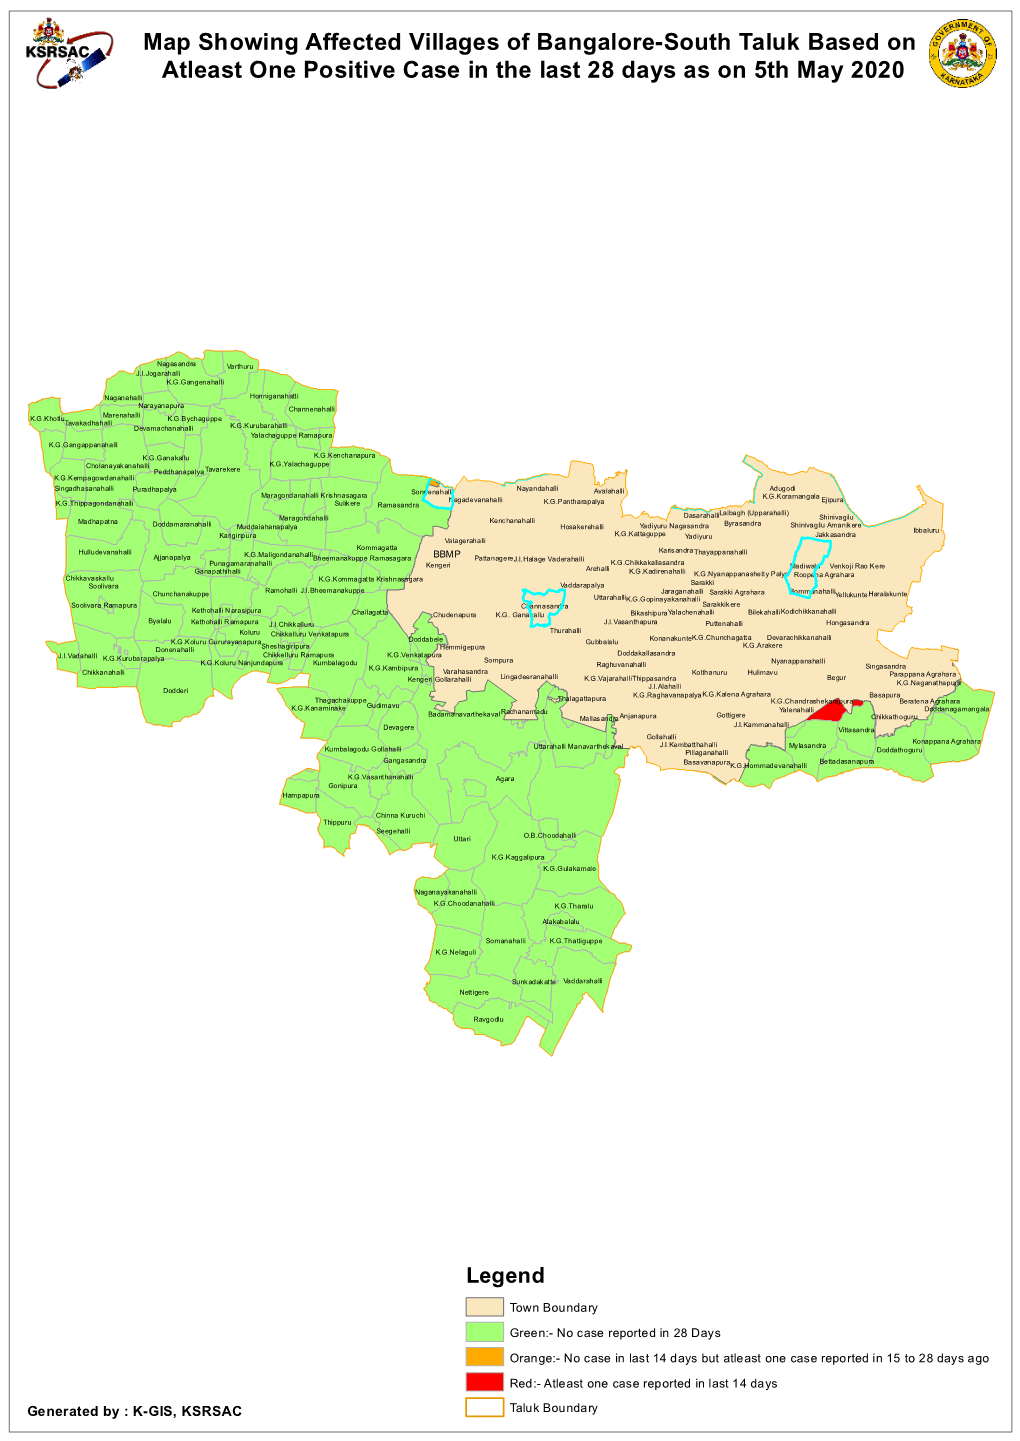 Map Showing Affected Villages of Bangalore-South Taluk Based on Atleast One Positive Case in the Last 28 Days As on 5Th May 2020